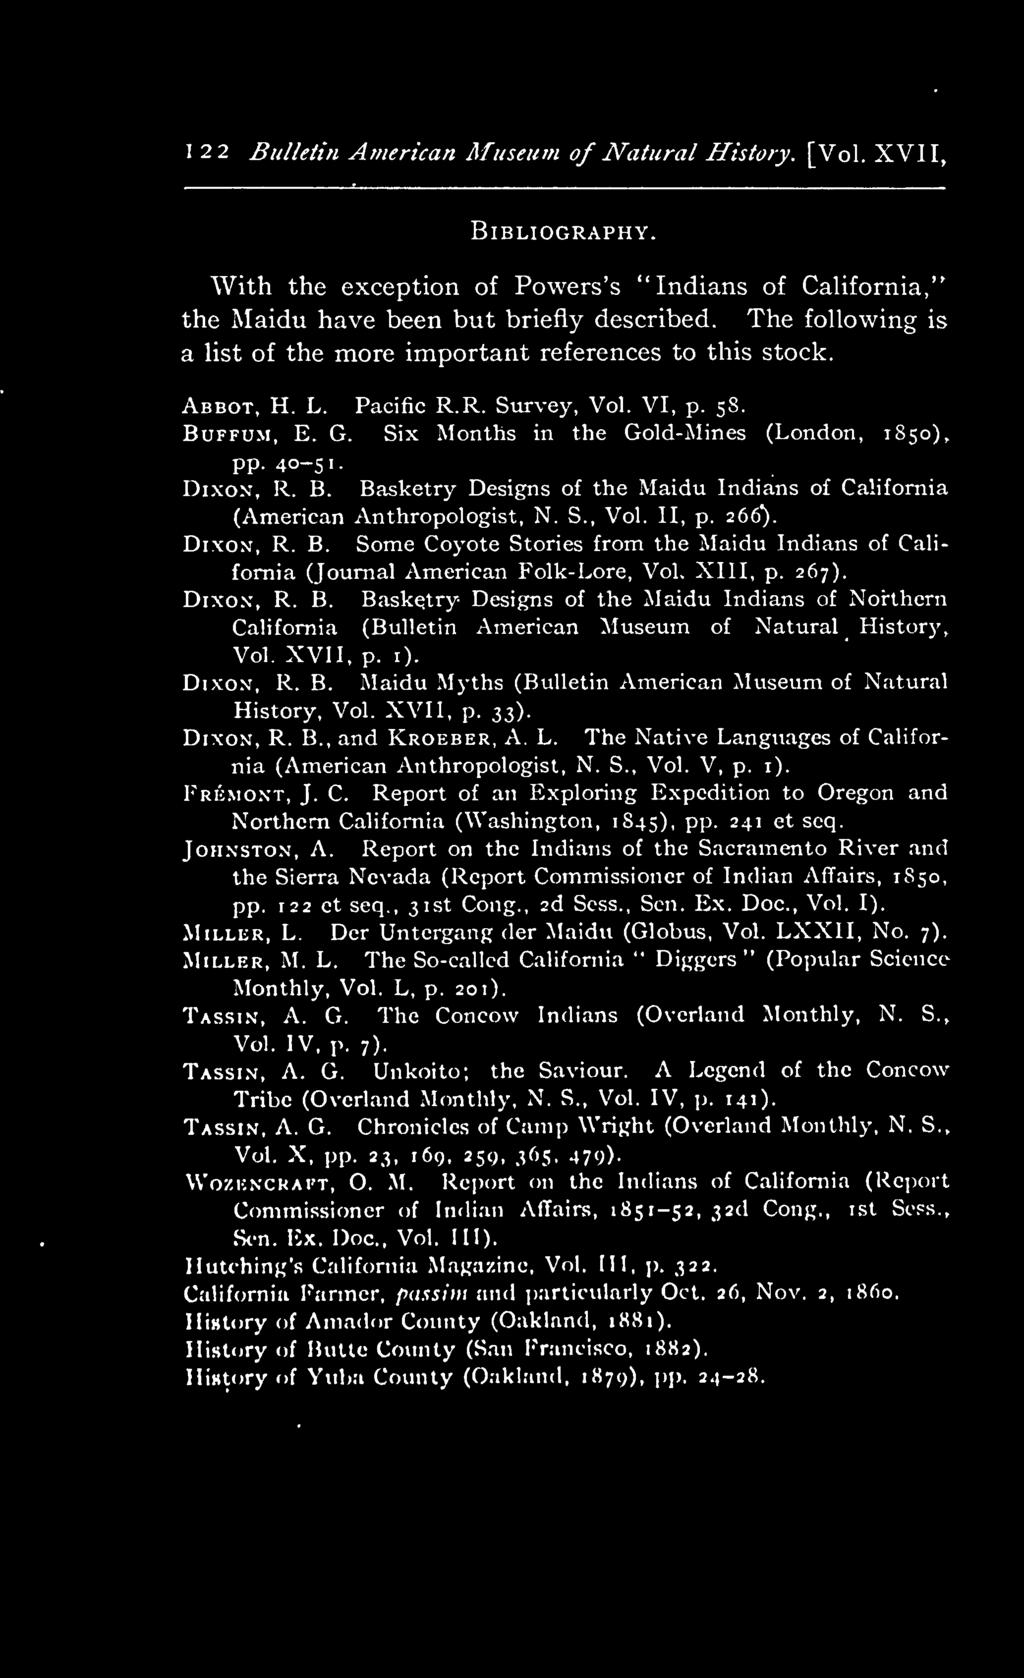 XVII, p. 33). Dixon, R. B., and Kroeber, A. L. The Native Languages of California (American Anthropologist, N. S., Vol. V, p. 1). Fkkmont, J. C. Report of an Exploring Expedition to Oregon and Northern California (Washington, 1845), pp.